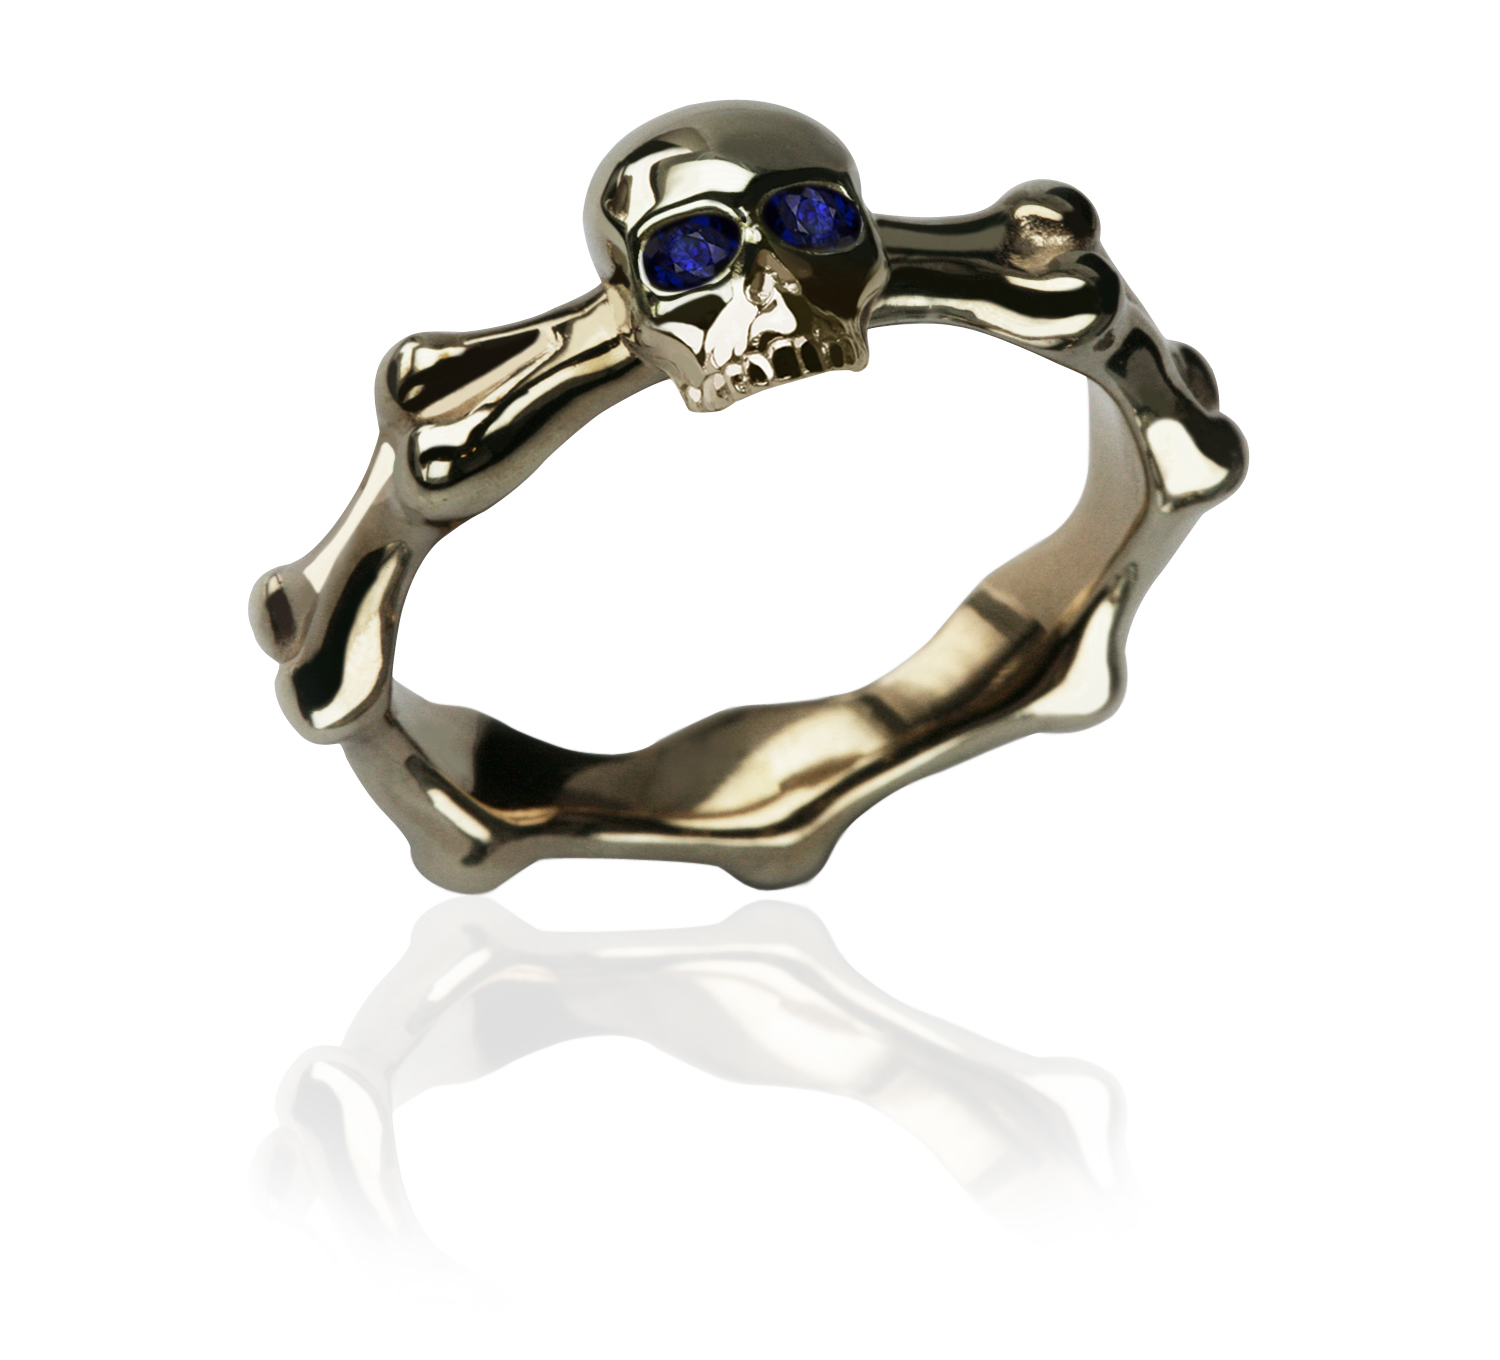 Skull and bones ring in yellow gold and blue sapphires_Stephen Einhorn London